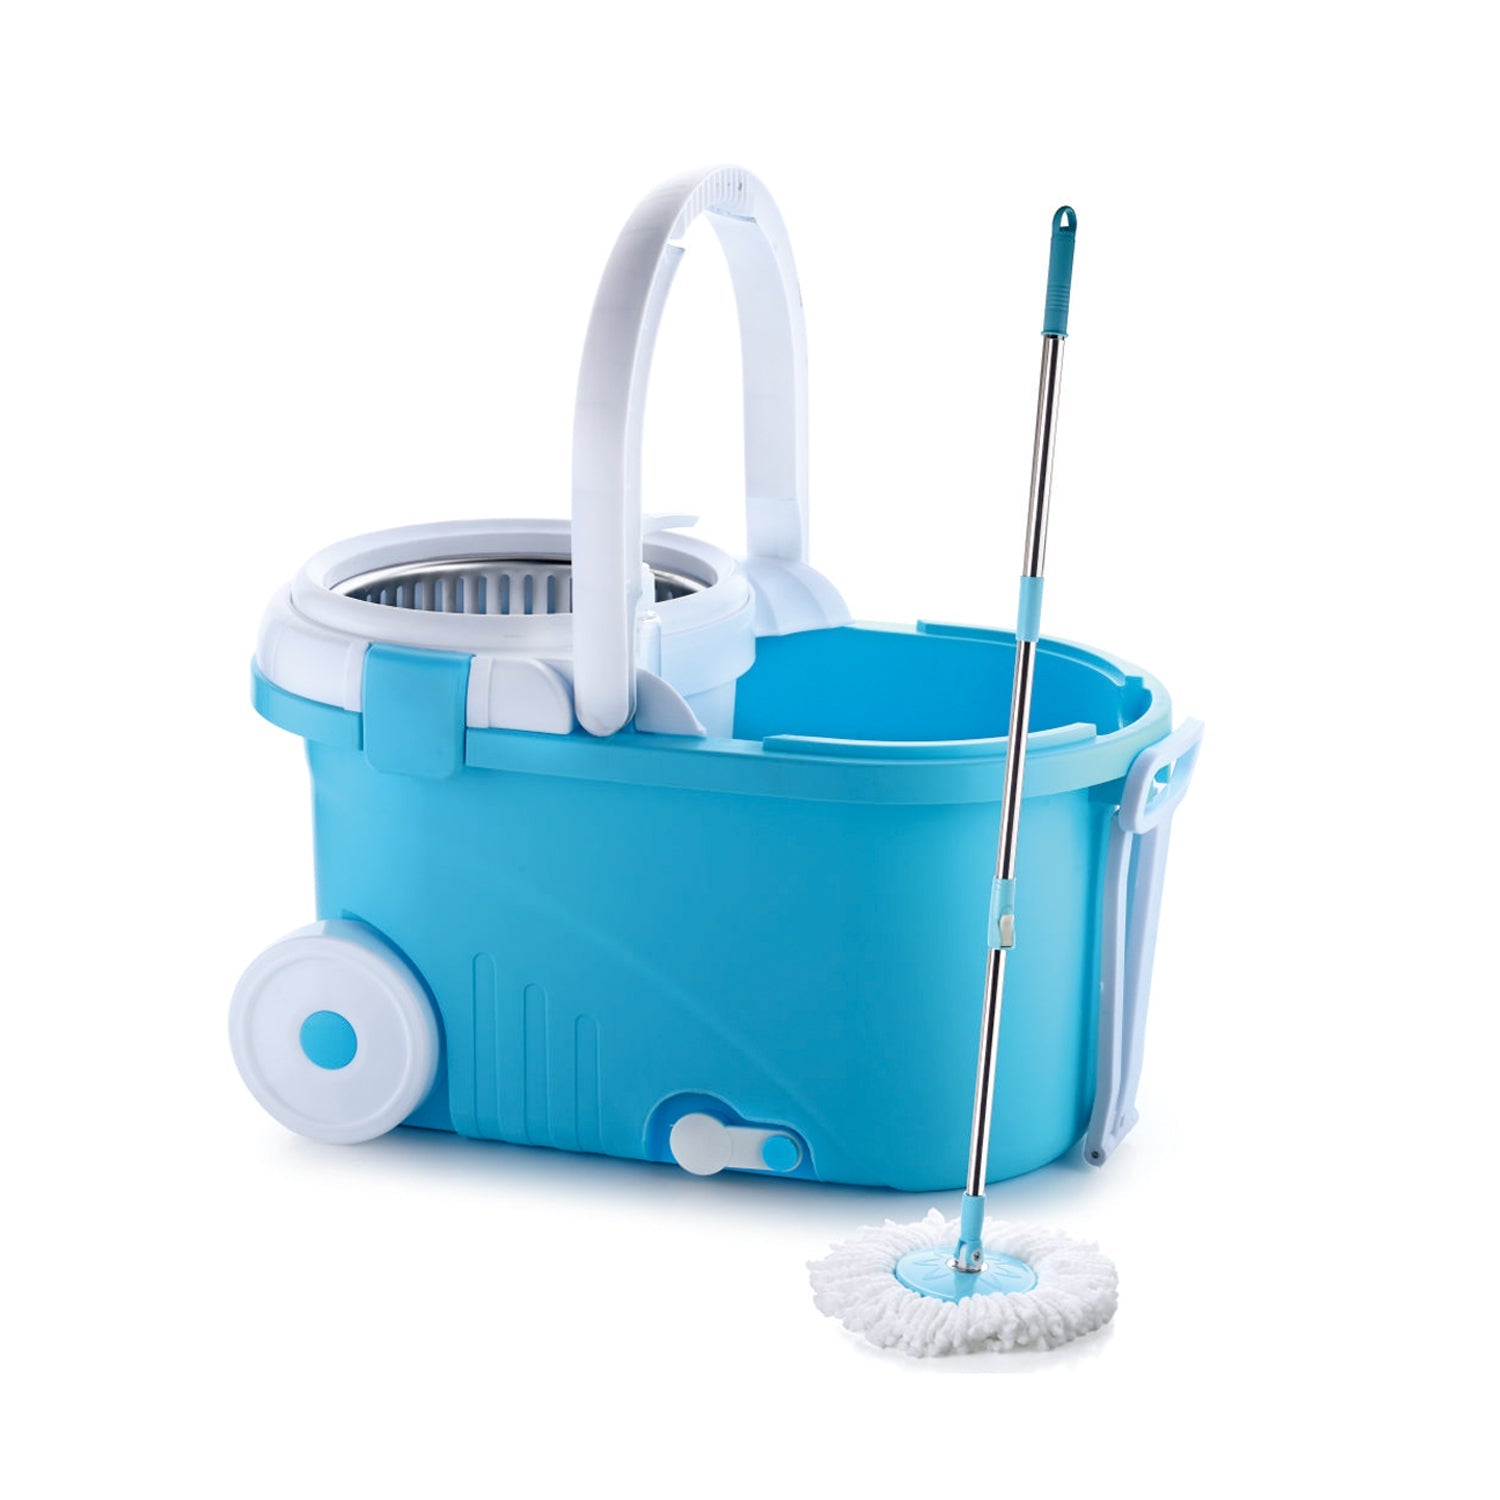 8713 GANESH Prime Plus Steel Spinner Bucket Mop 360 Degree Self Spin Wringing with 2 Absorbers for Home and Office Floor Cleaning Mops Set. DeoDap